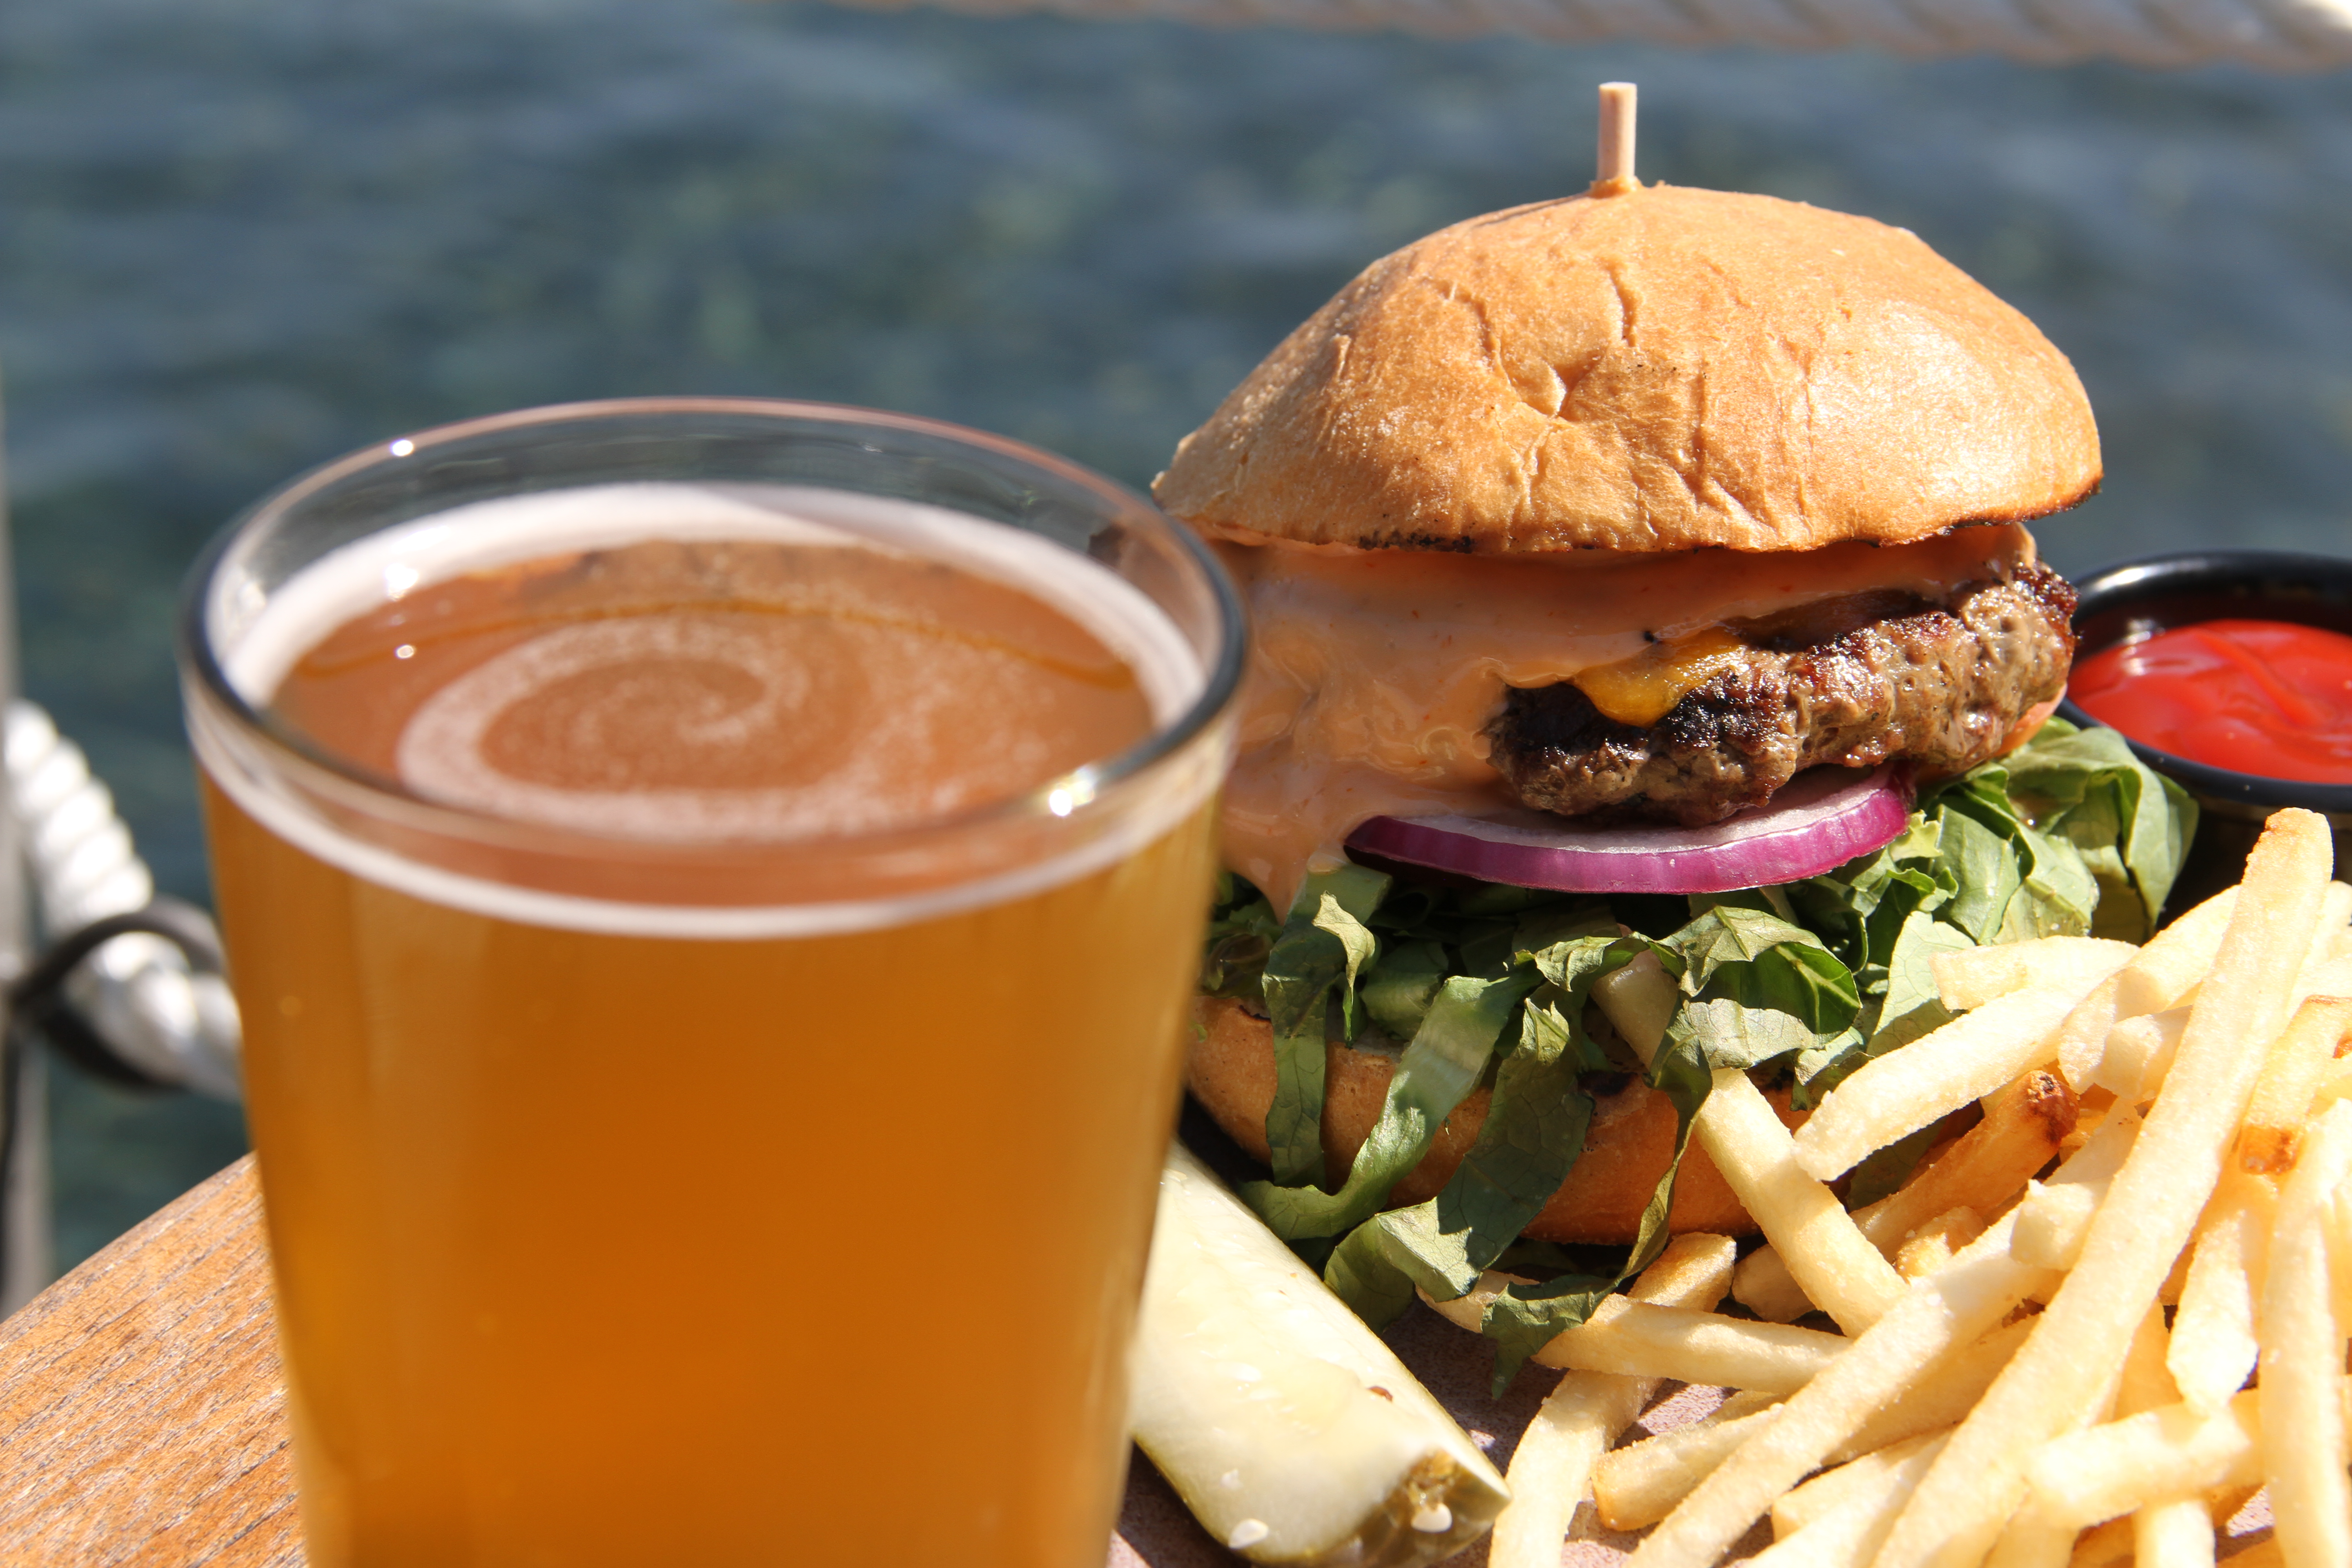 An up close photo shows a cheeseburger, fries and a beer.